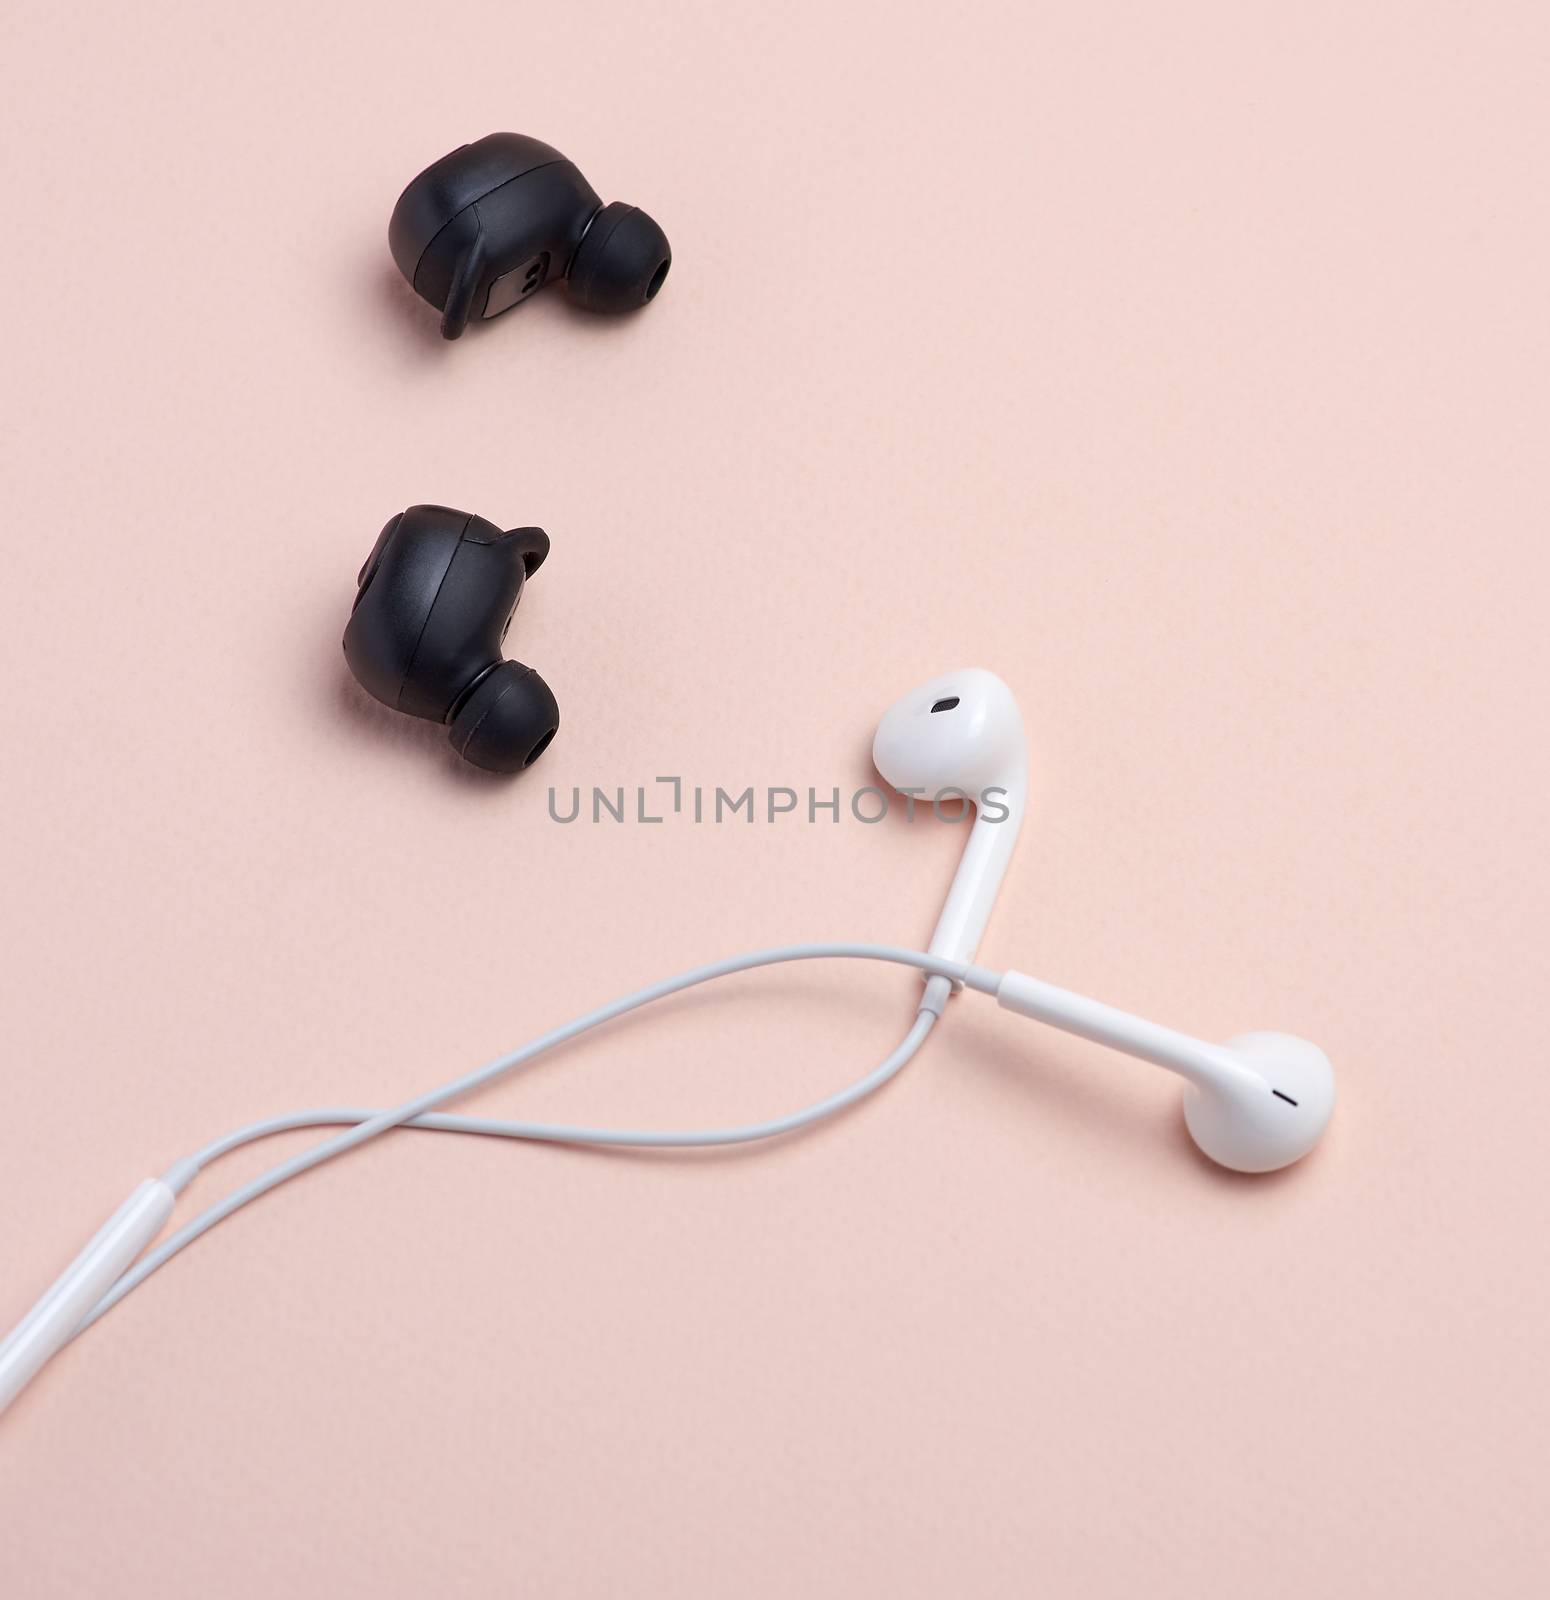 black wireless and white earphones with wire on a beige background, technology concept